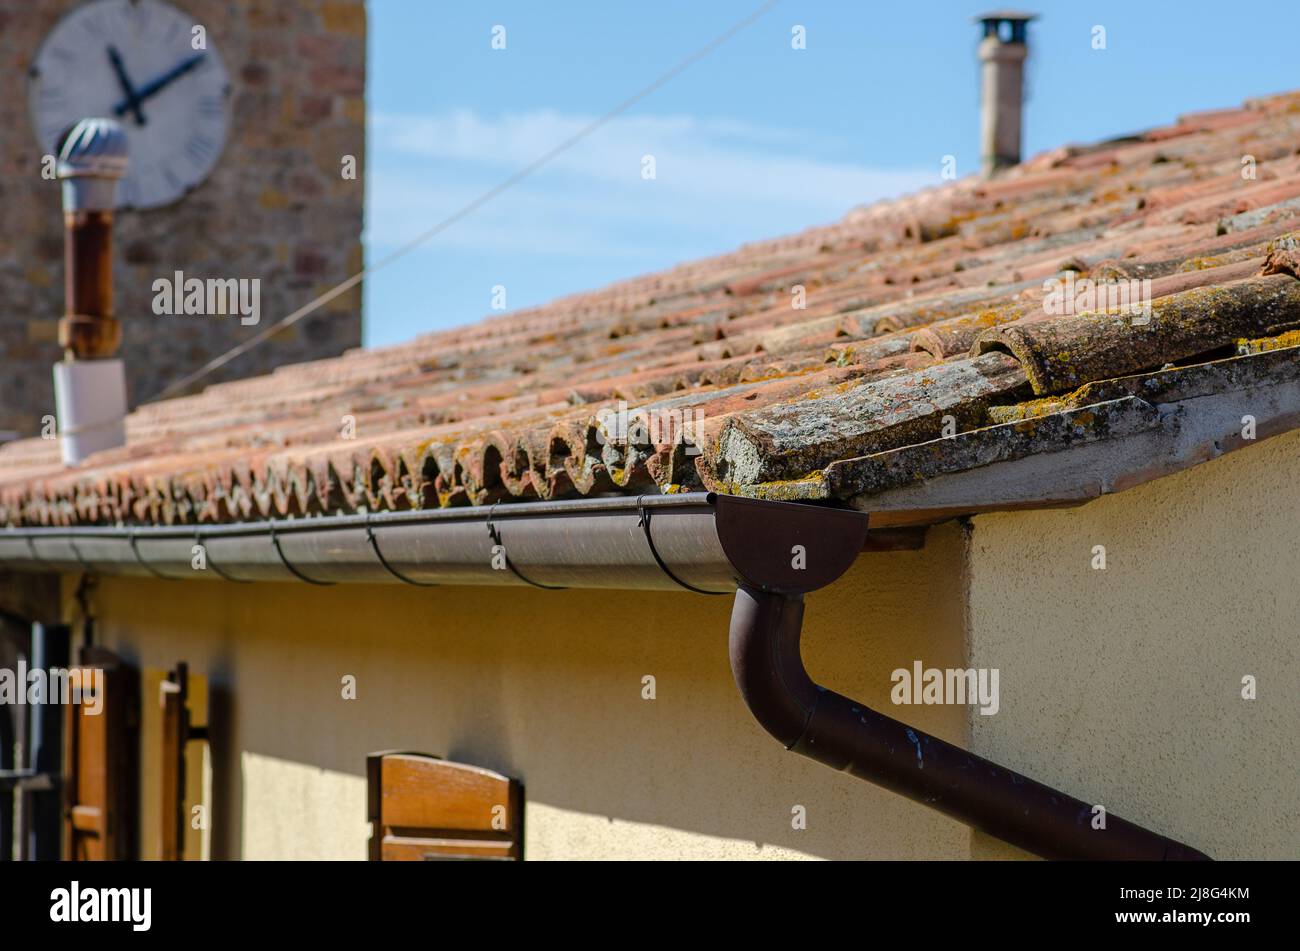 House: building with pitched roof with brick tiles, visible the wool eaves, and front of the cornice. Stock Photo